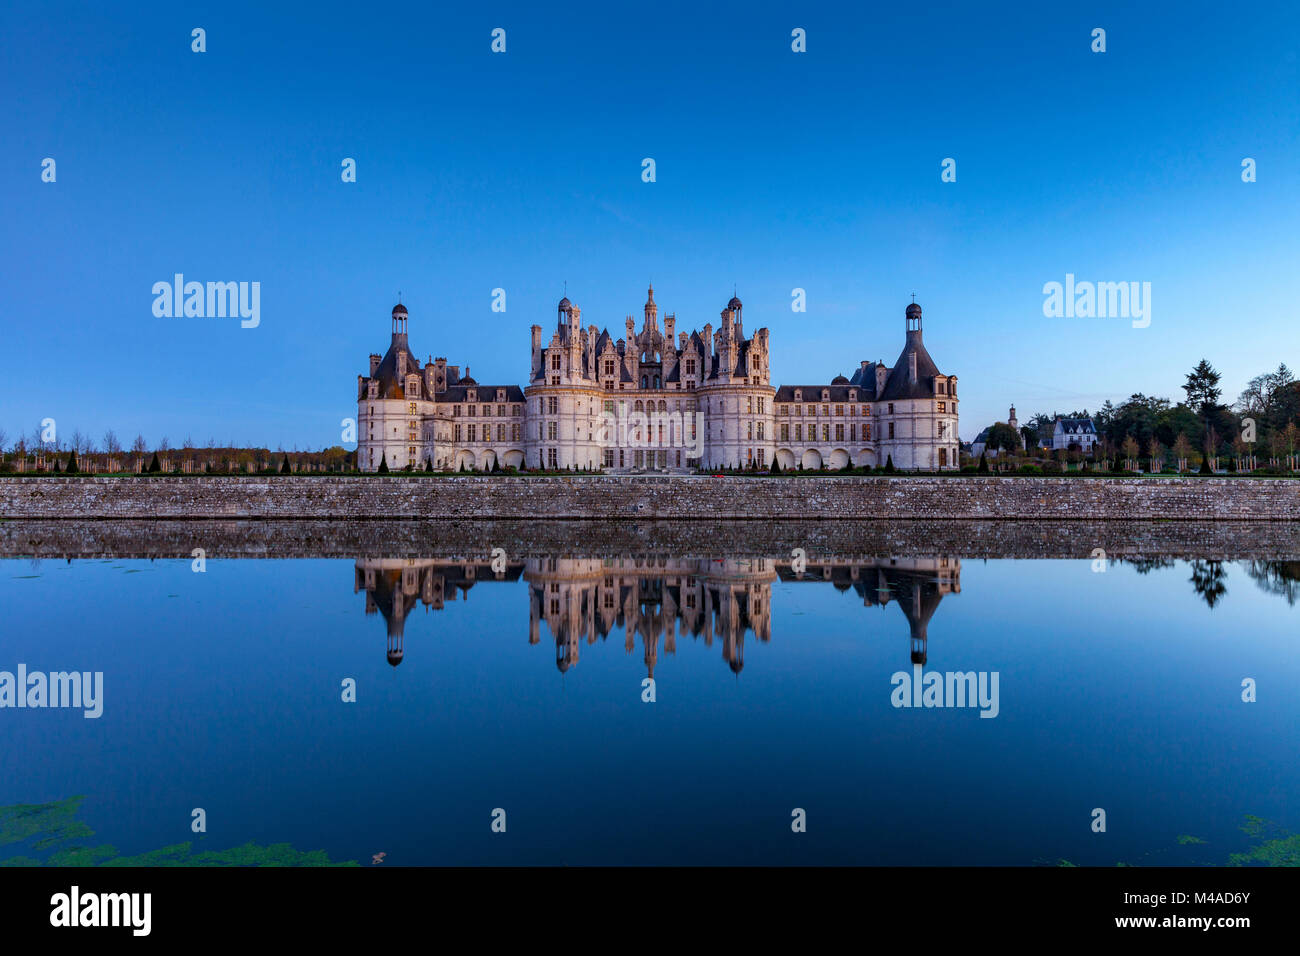 The Chateau de Chambord, a Renaissance style castle, is registered as a UNESCO World Heritage Site and National Historic Landmark (French ÒMonument hi Stock Photo